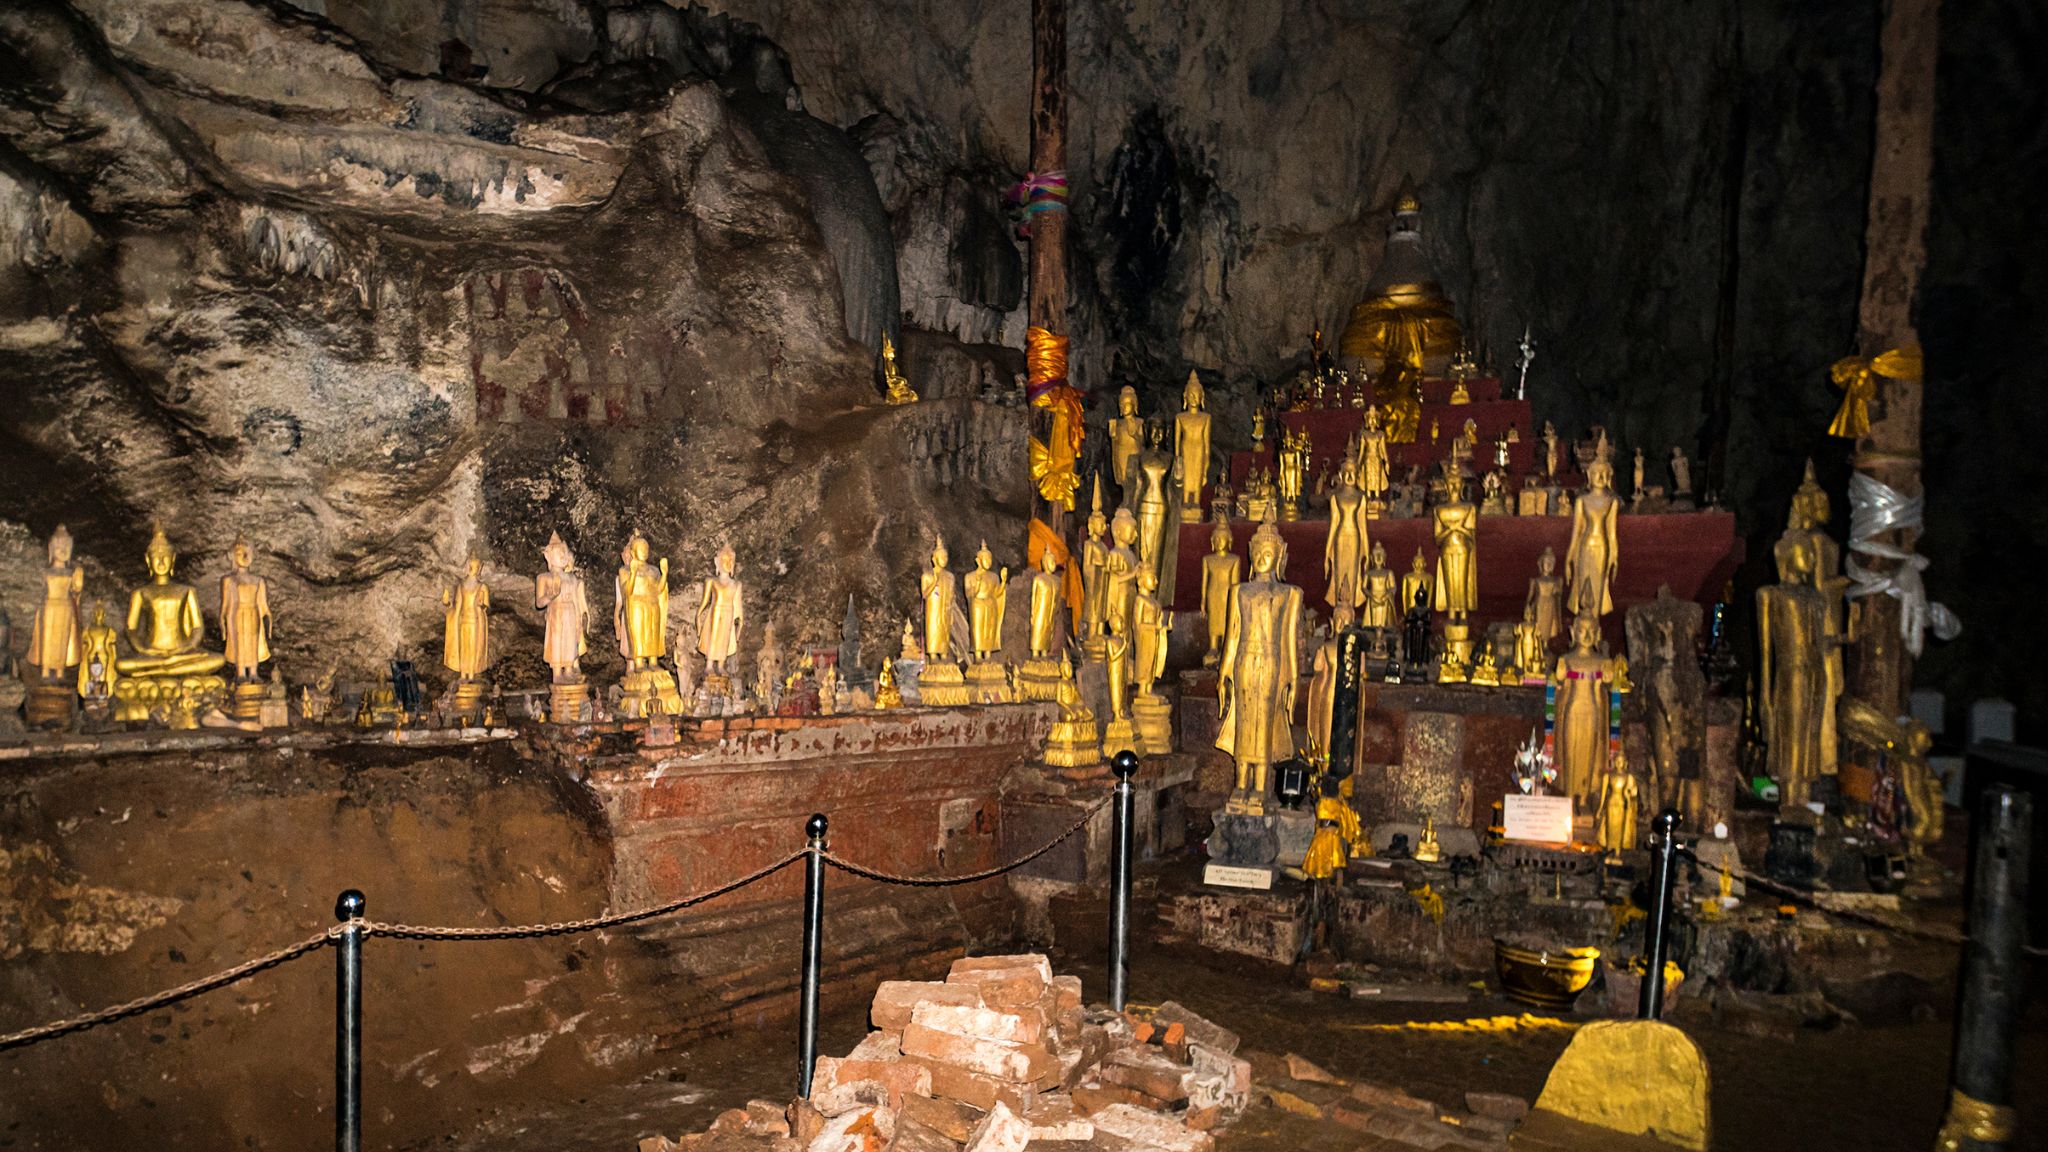 Day 5 Admire Thousands Of Gold Lacquered Buddha Statues